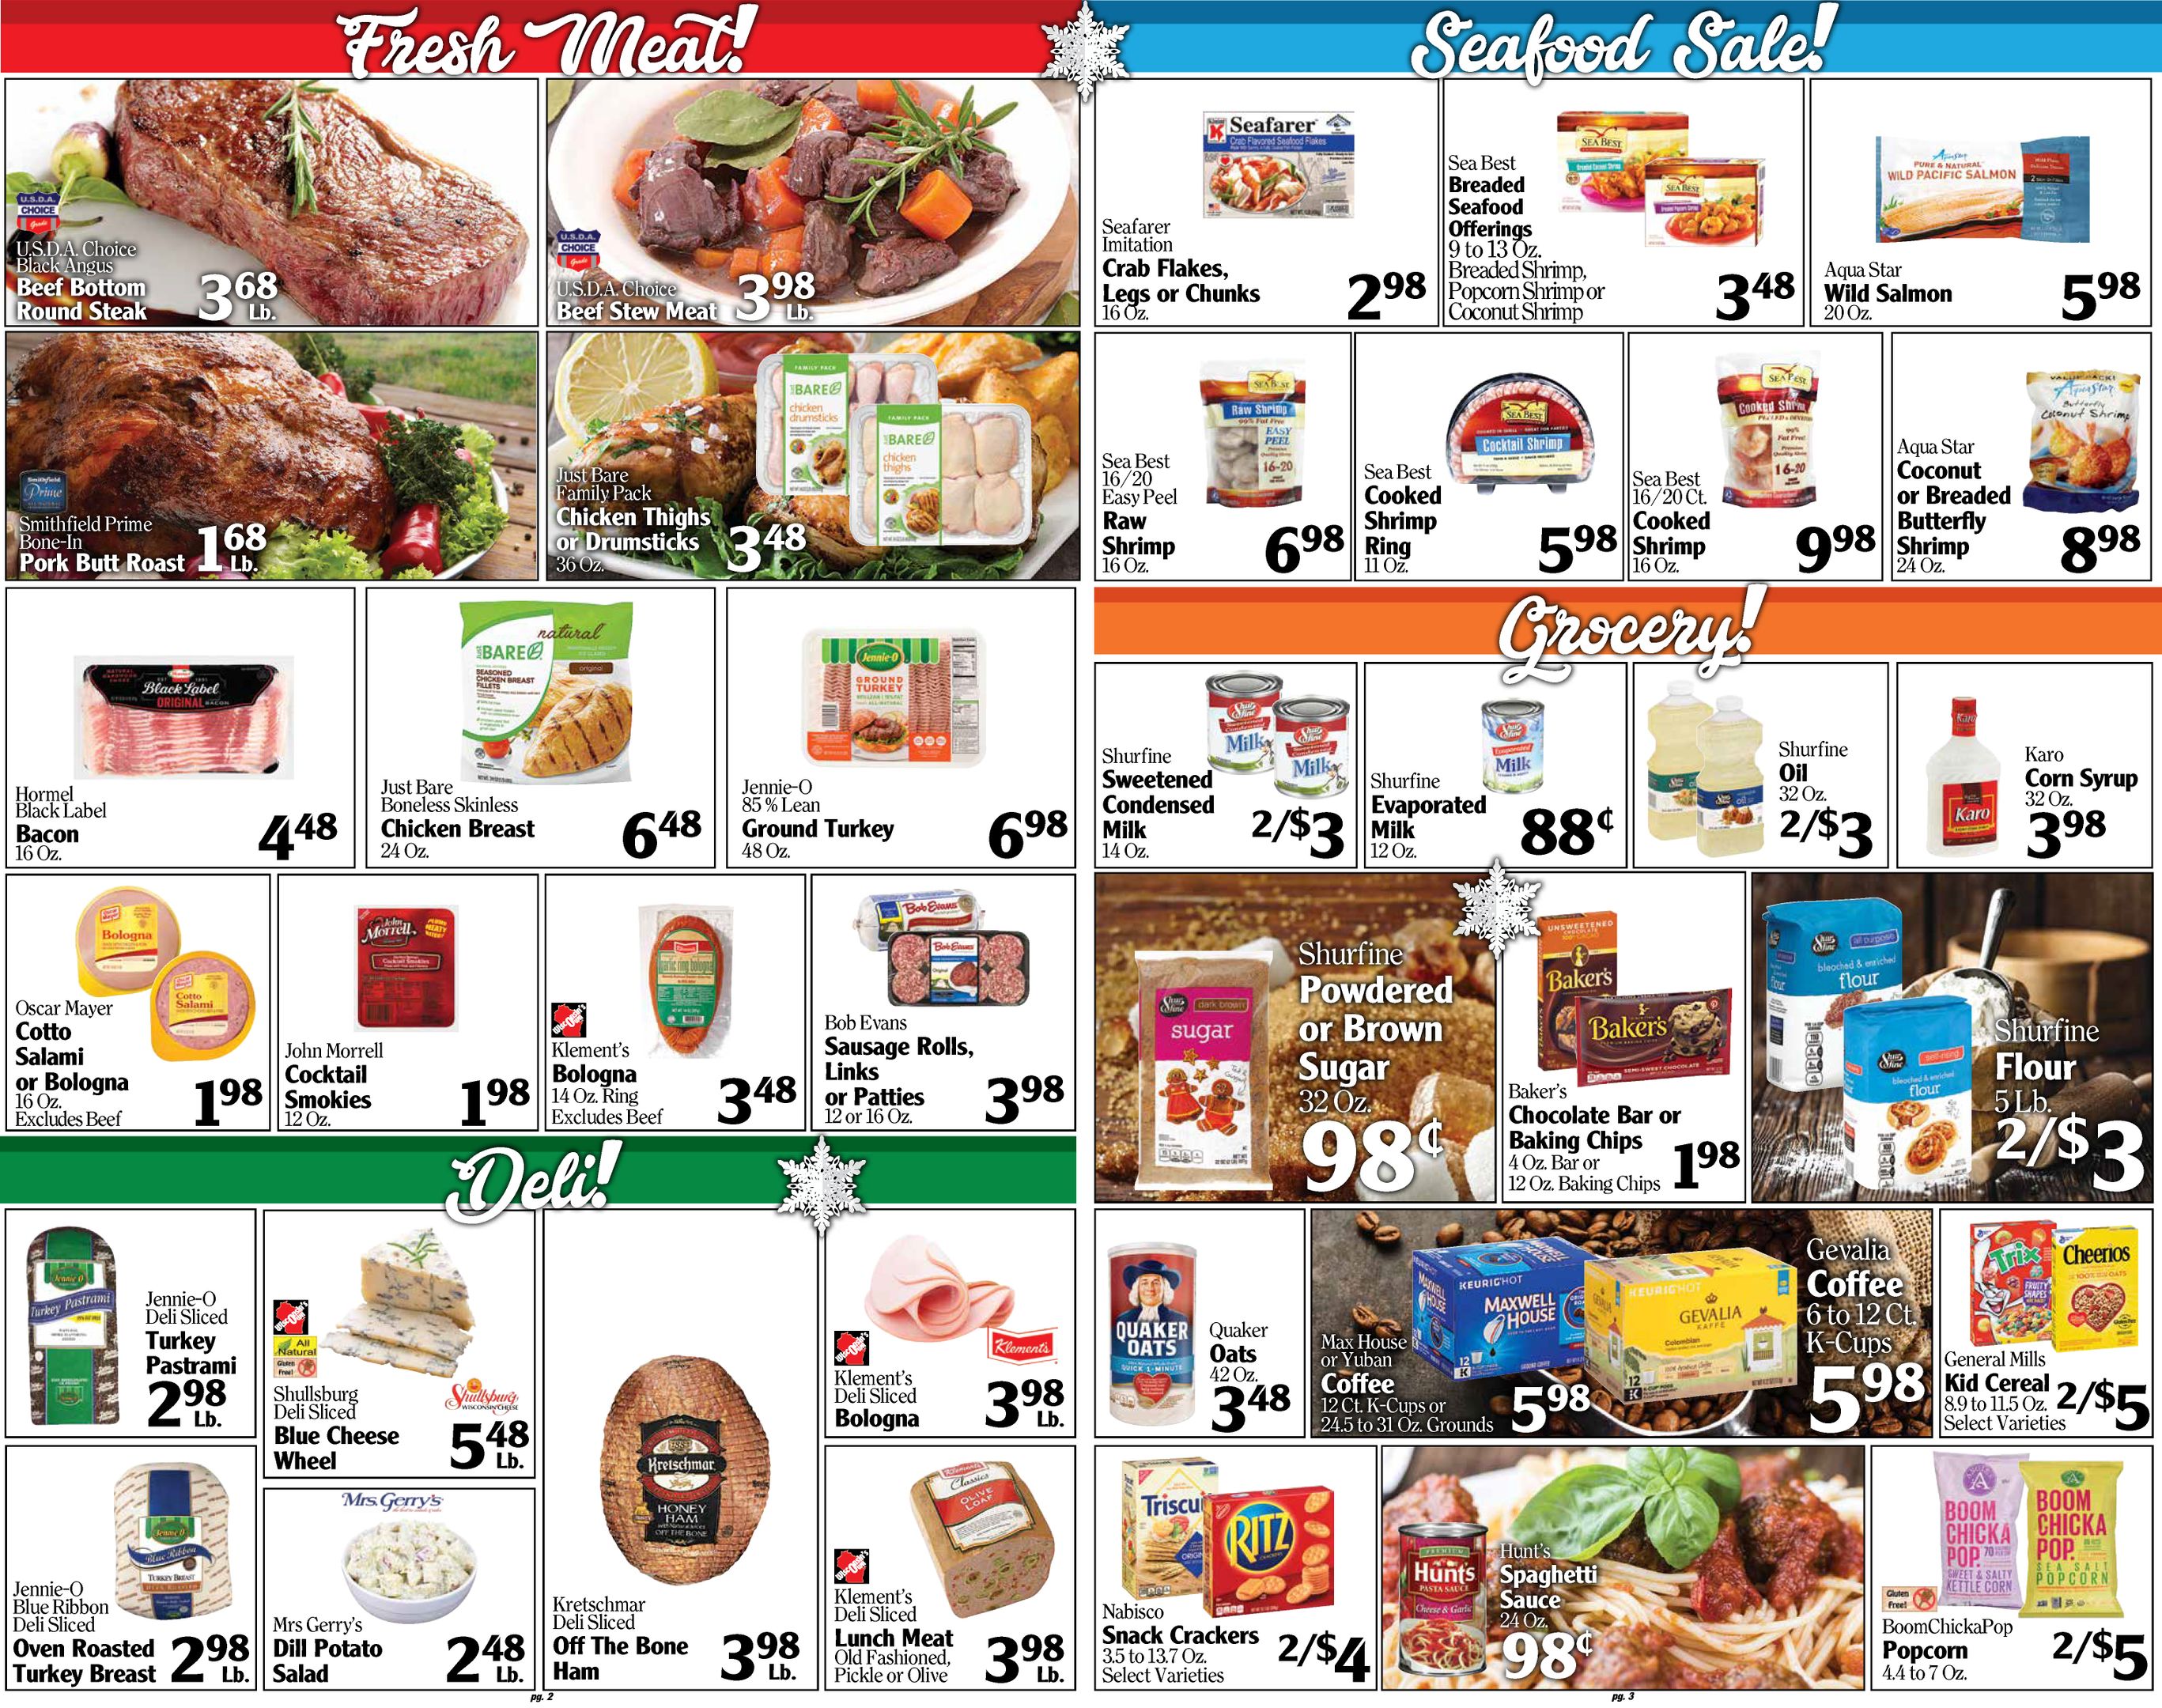 Pritzl's Trading Post Weekly Ad - Page 2 and 3